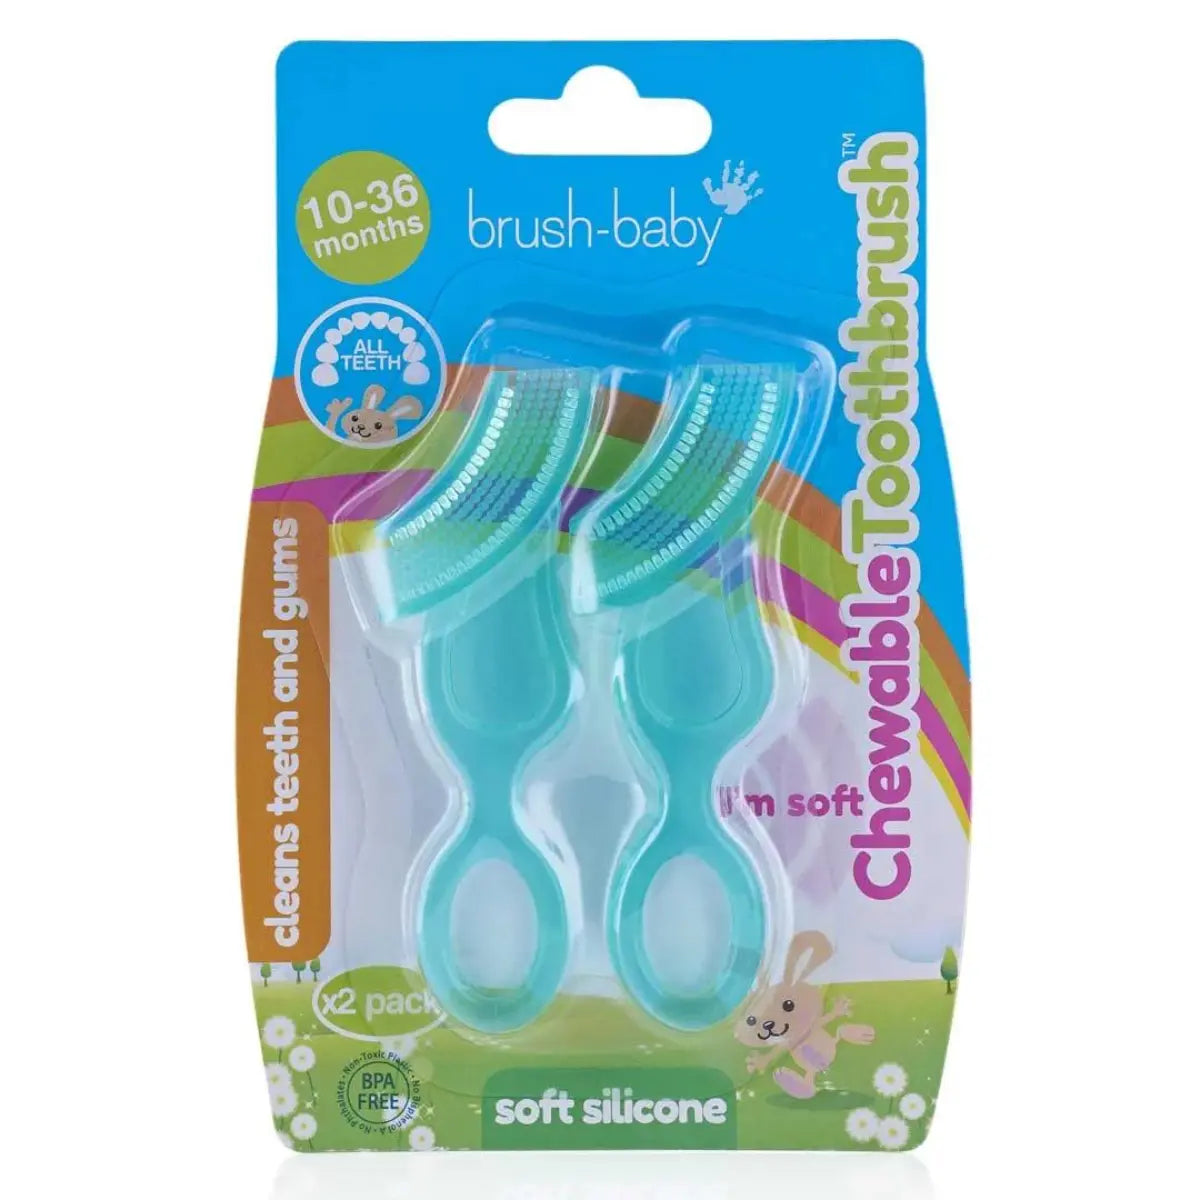 Chewable Toothbrush (Double Pack) by Brush-Baby